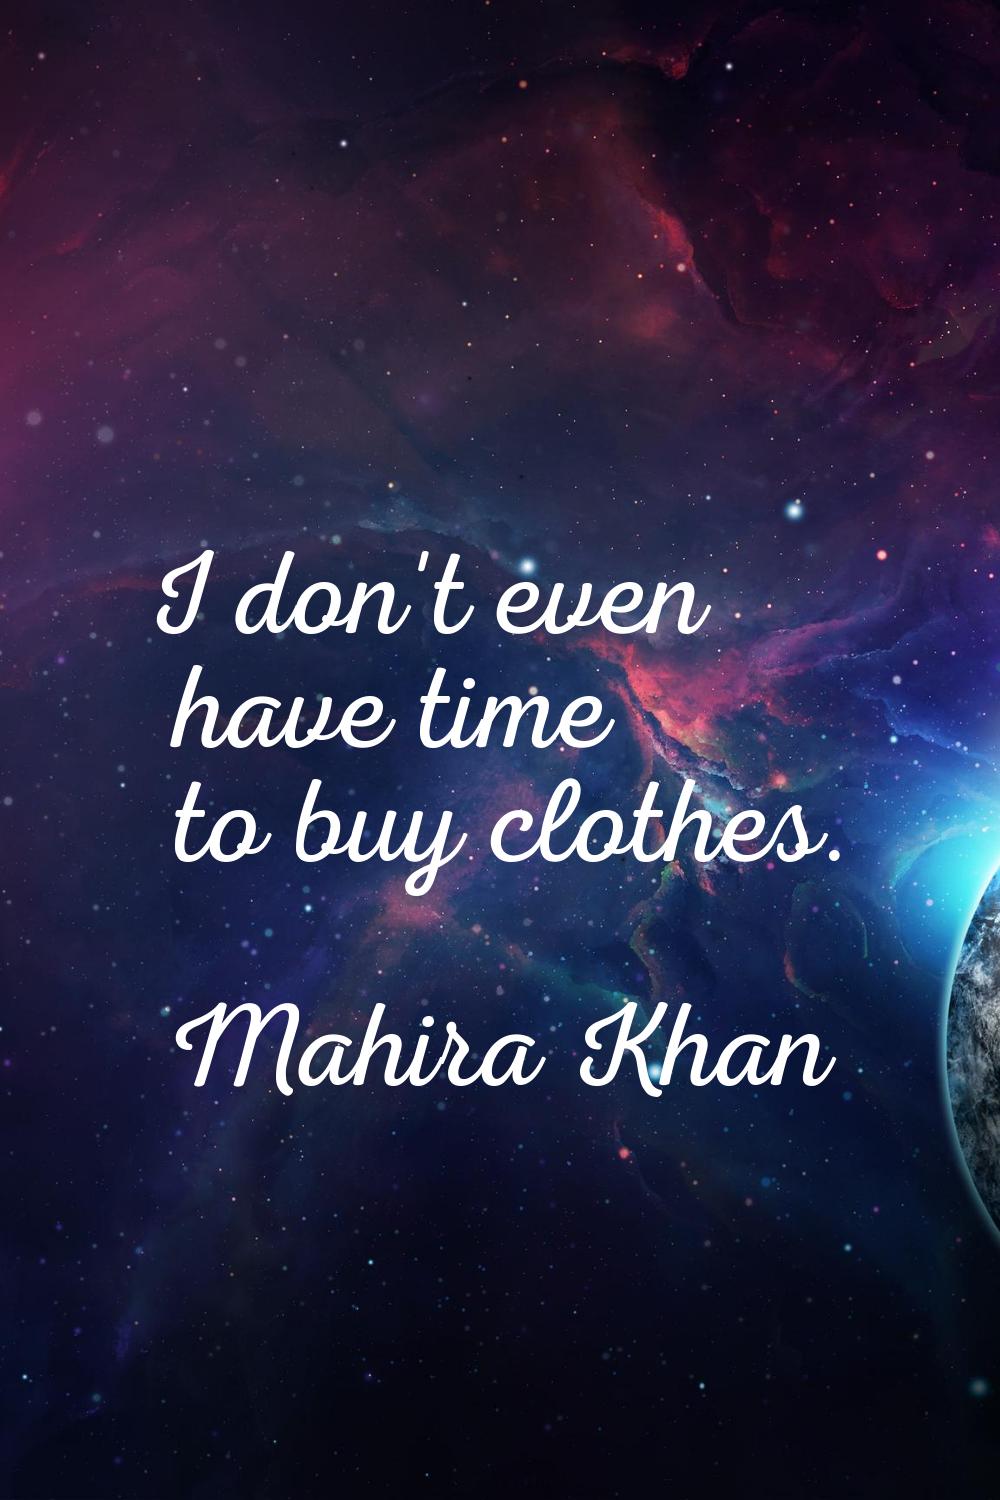 I don't even have time to buy clothes.